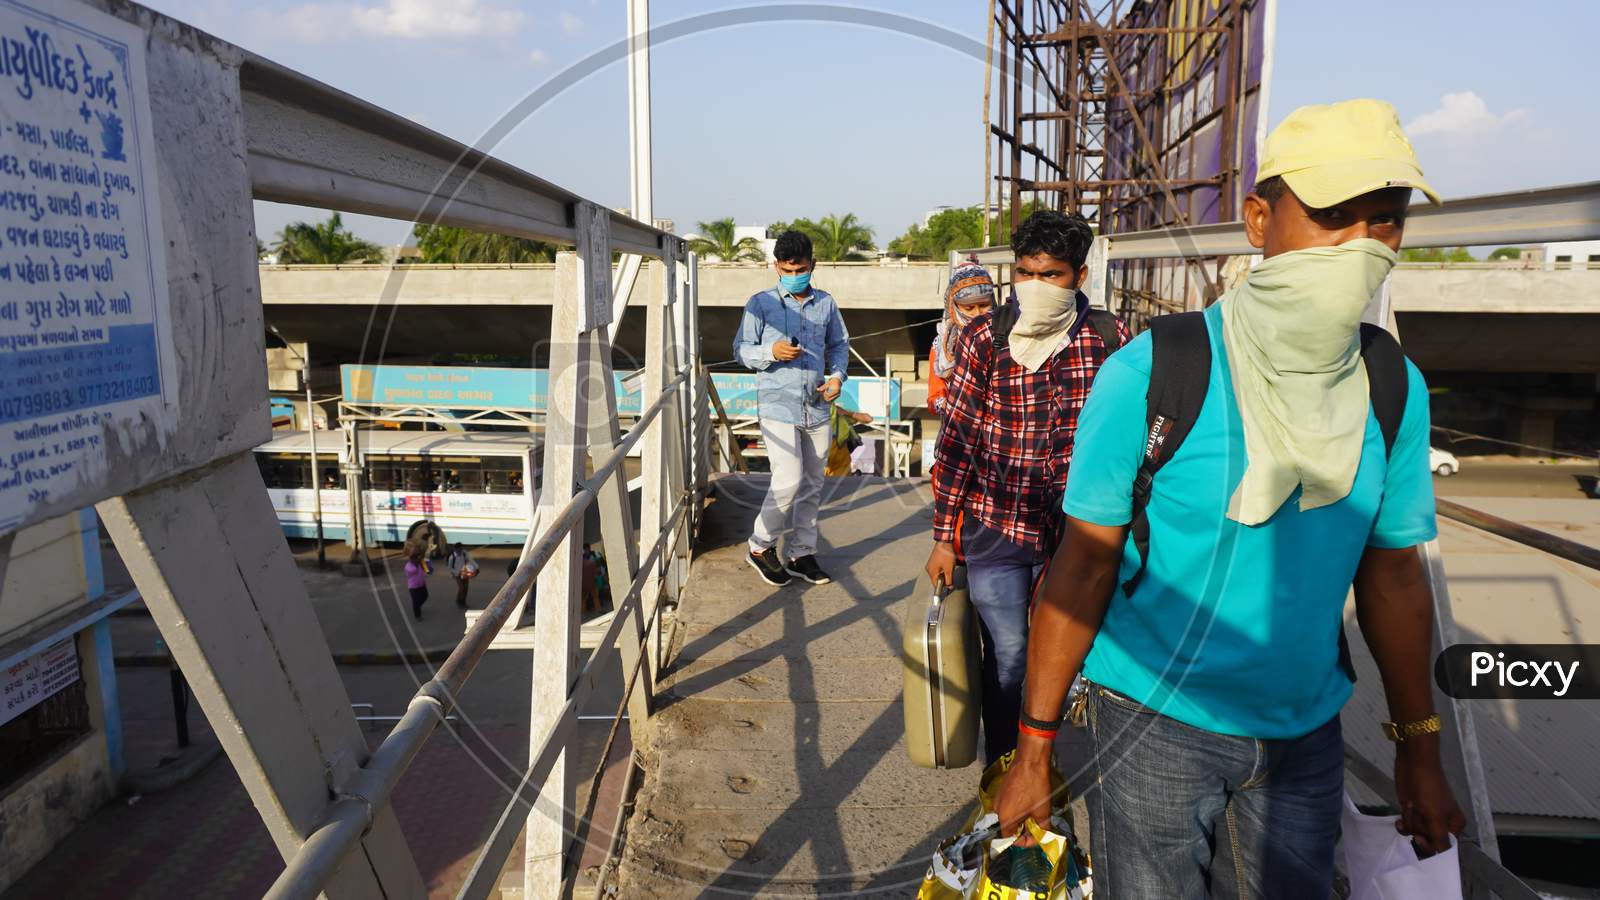 MIGRANT WORKERS. Indian migrant workers during COVID 19 Corona Virus nationwide lockdown returning back home special trains Bus Railway station. Police on duty.